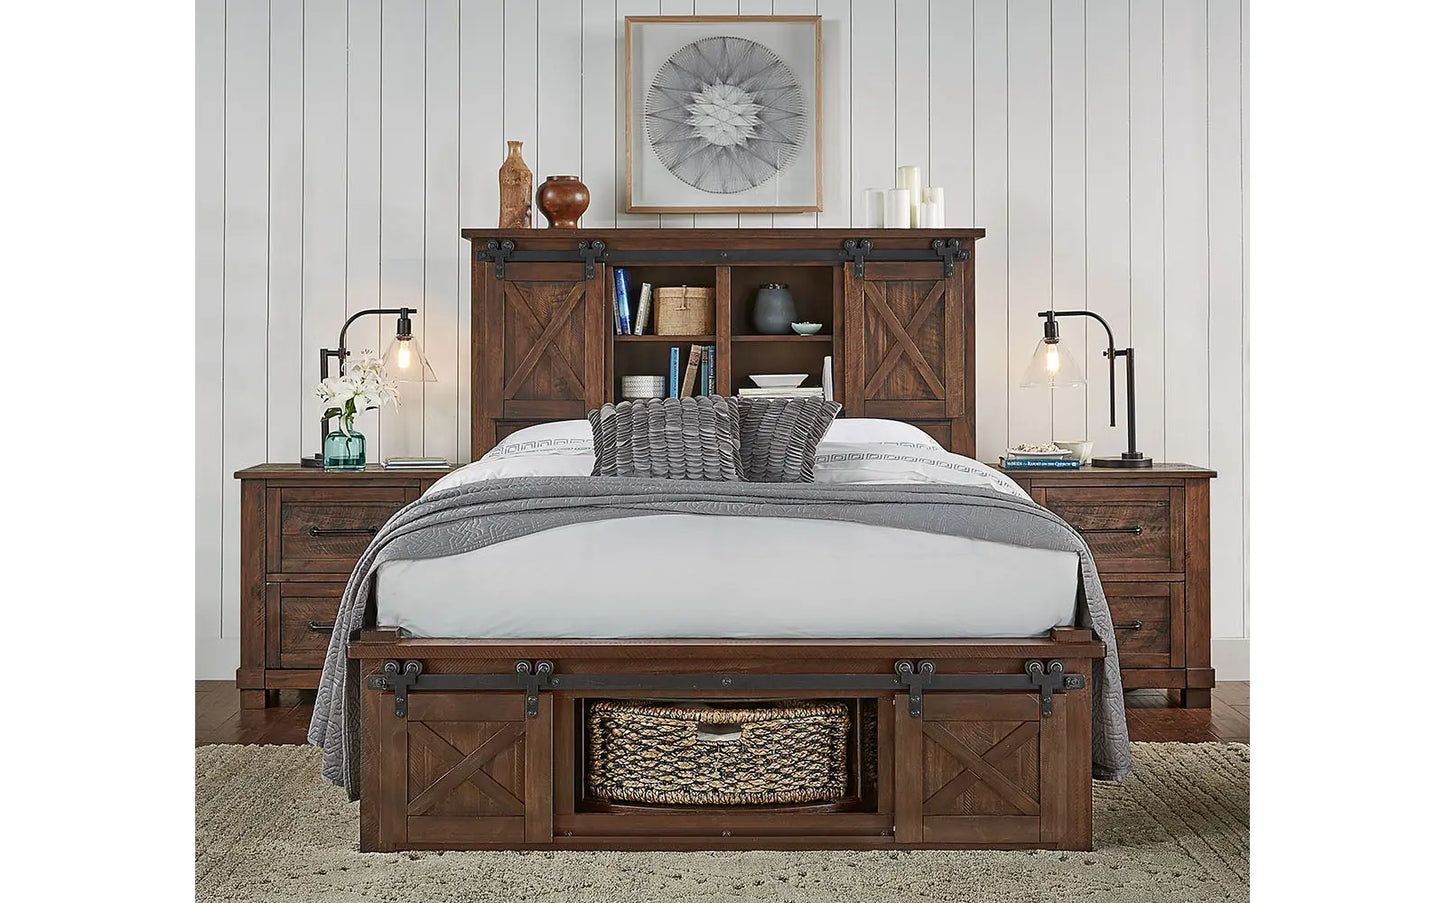 Sun Valley Rustic Timber Queen Storage Hdbr W/ Rotating Storage A-America